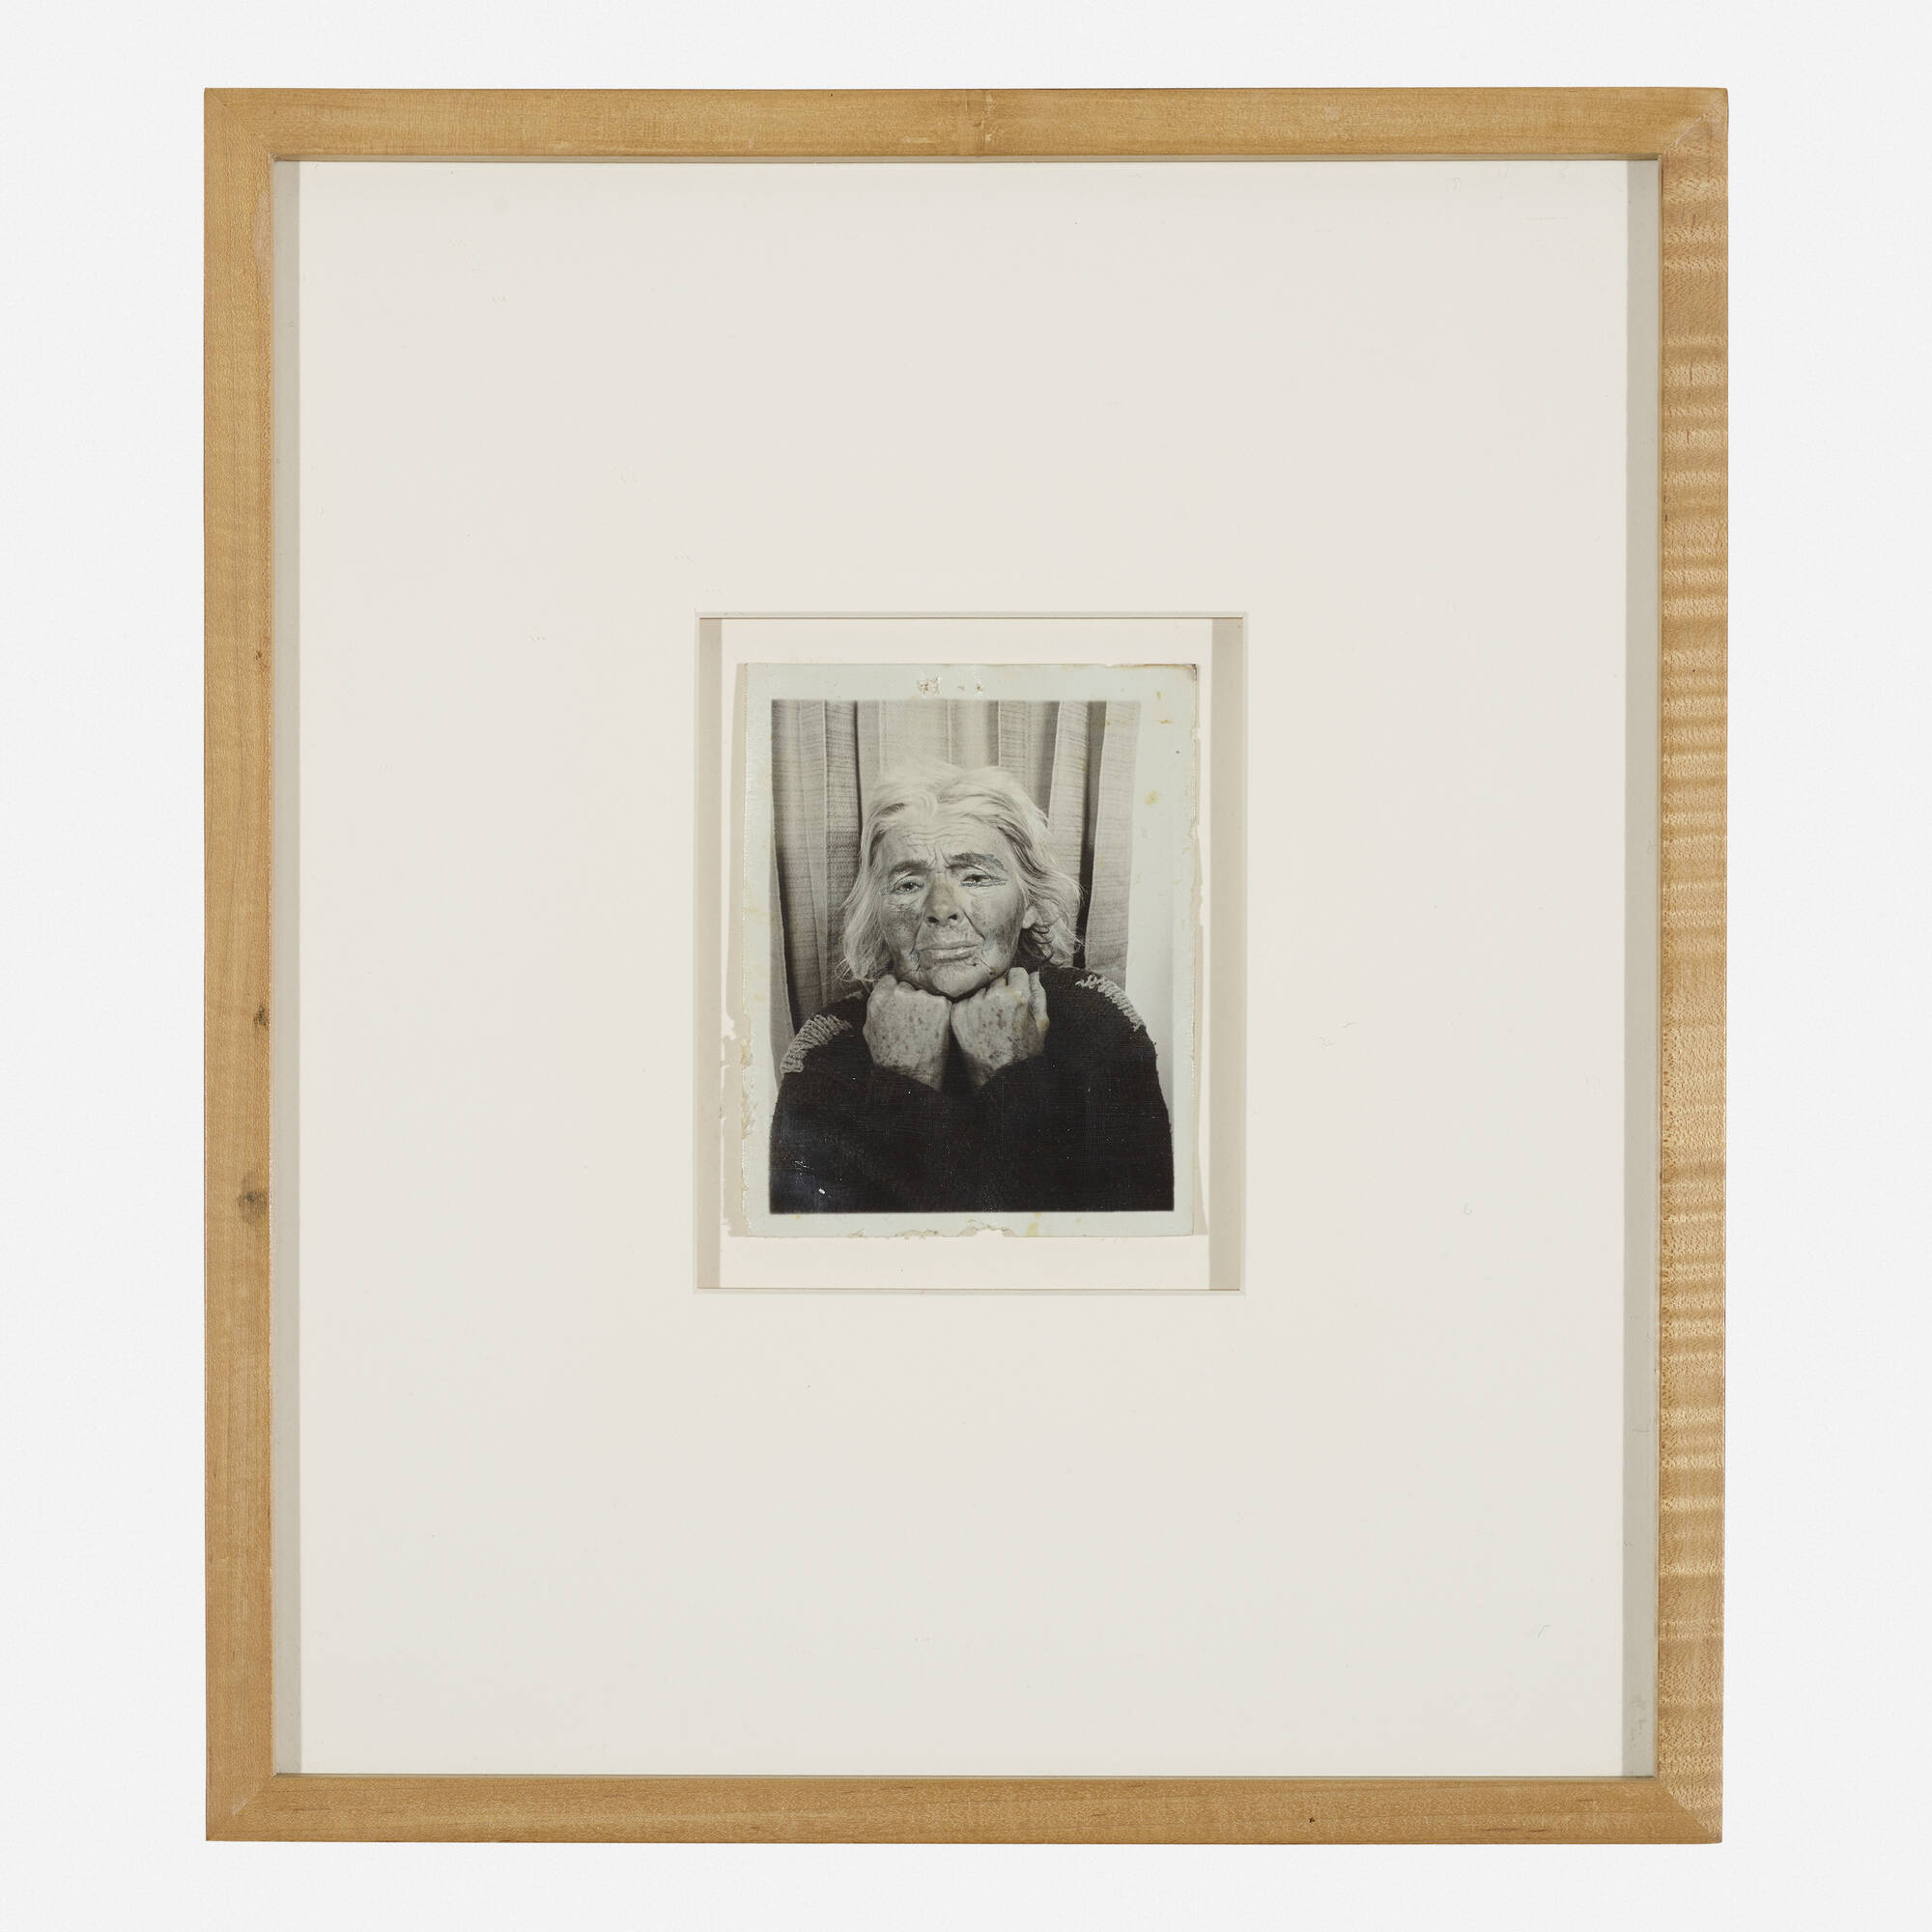 188: LEE GODIE, Untitled (photo booth self-portrait) < Post War &  Contemporary Art, 10 November 2021 < Auctions | Wright: Auctions of Art and  Design